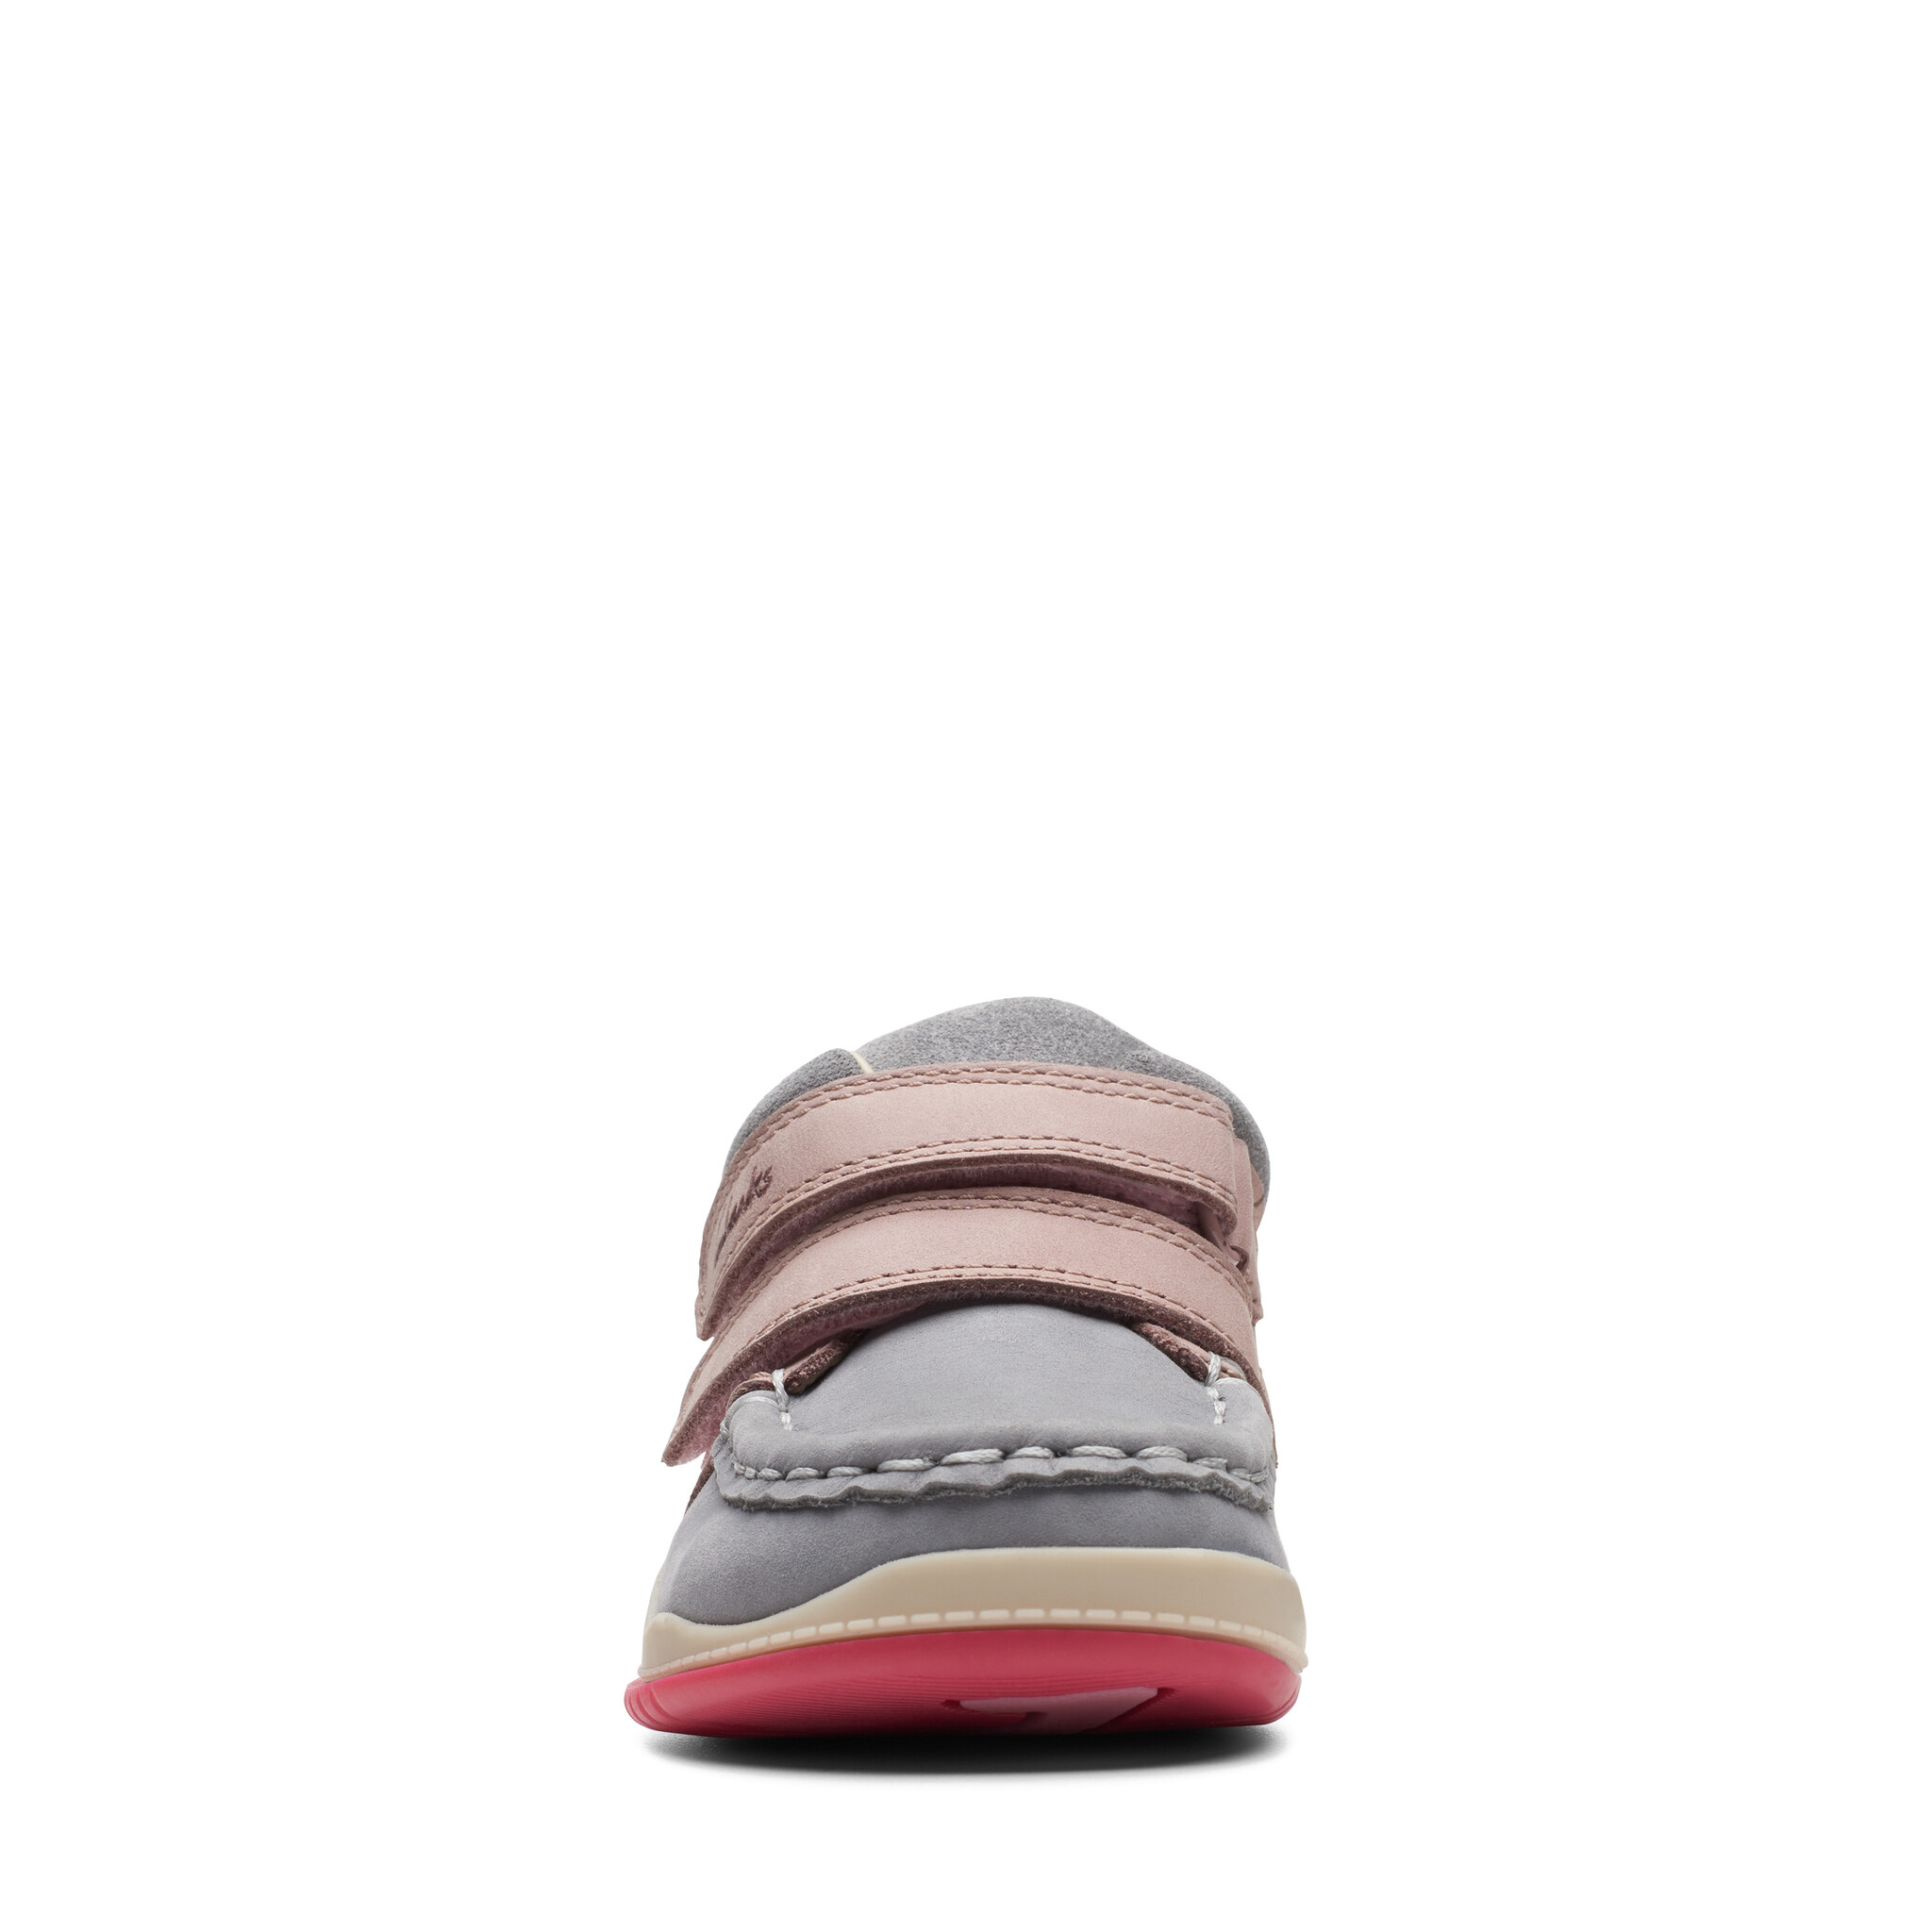 Clarks Noodle Play T Grey/Pink